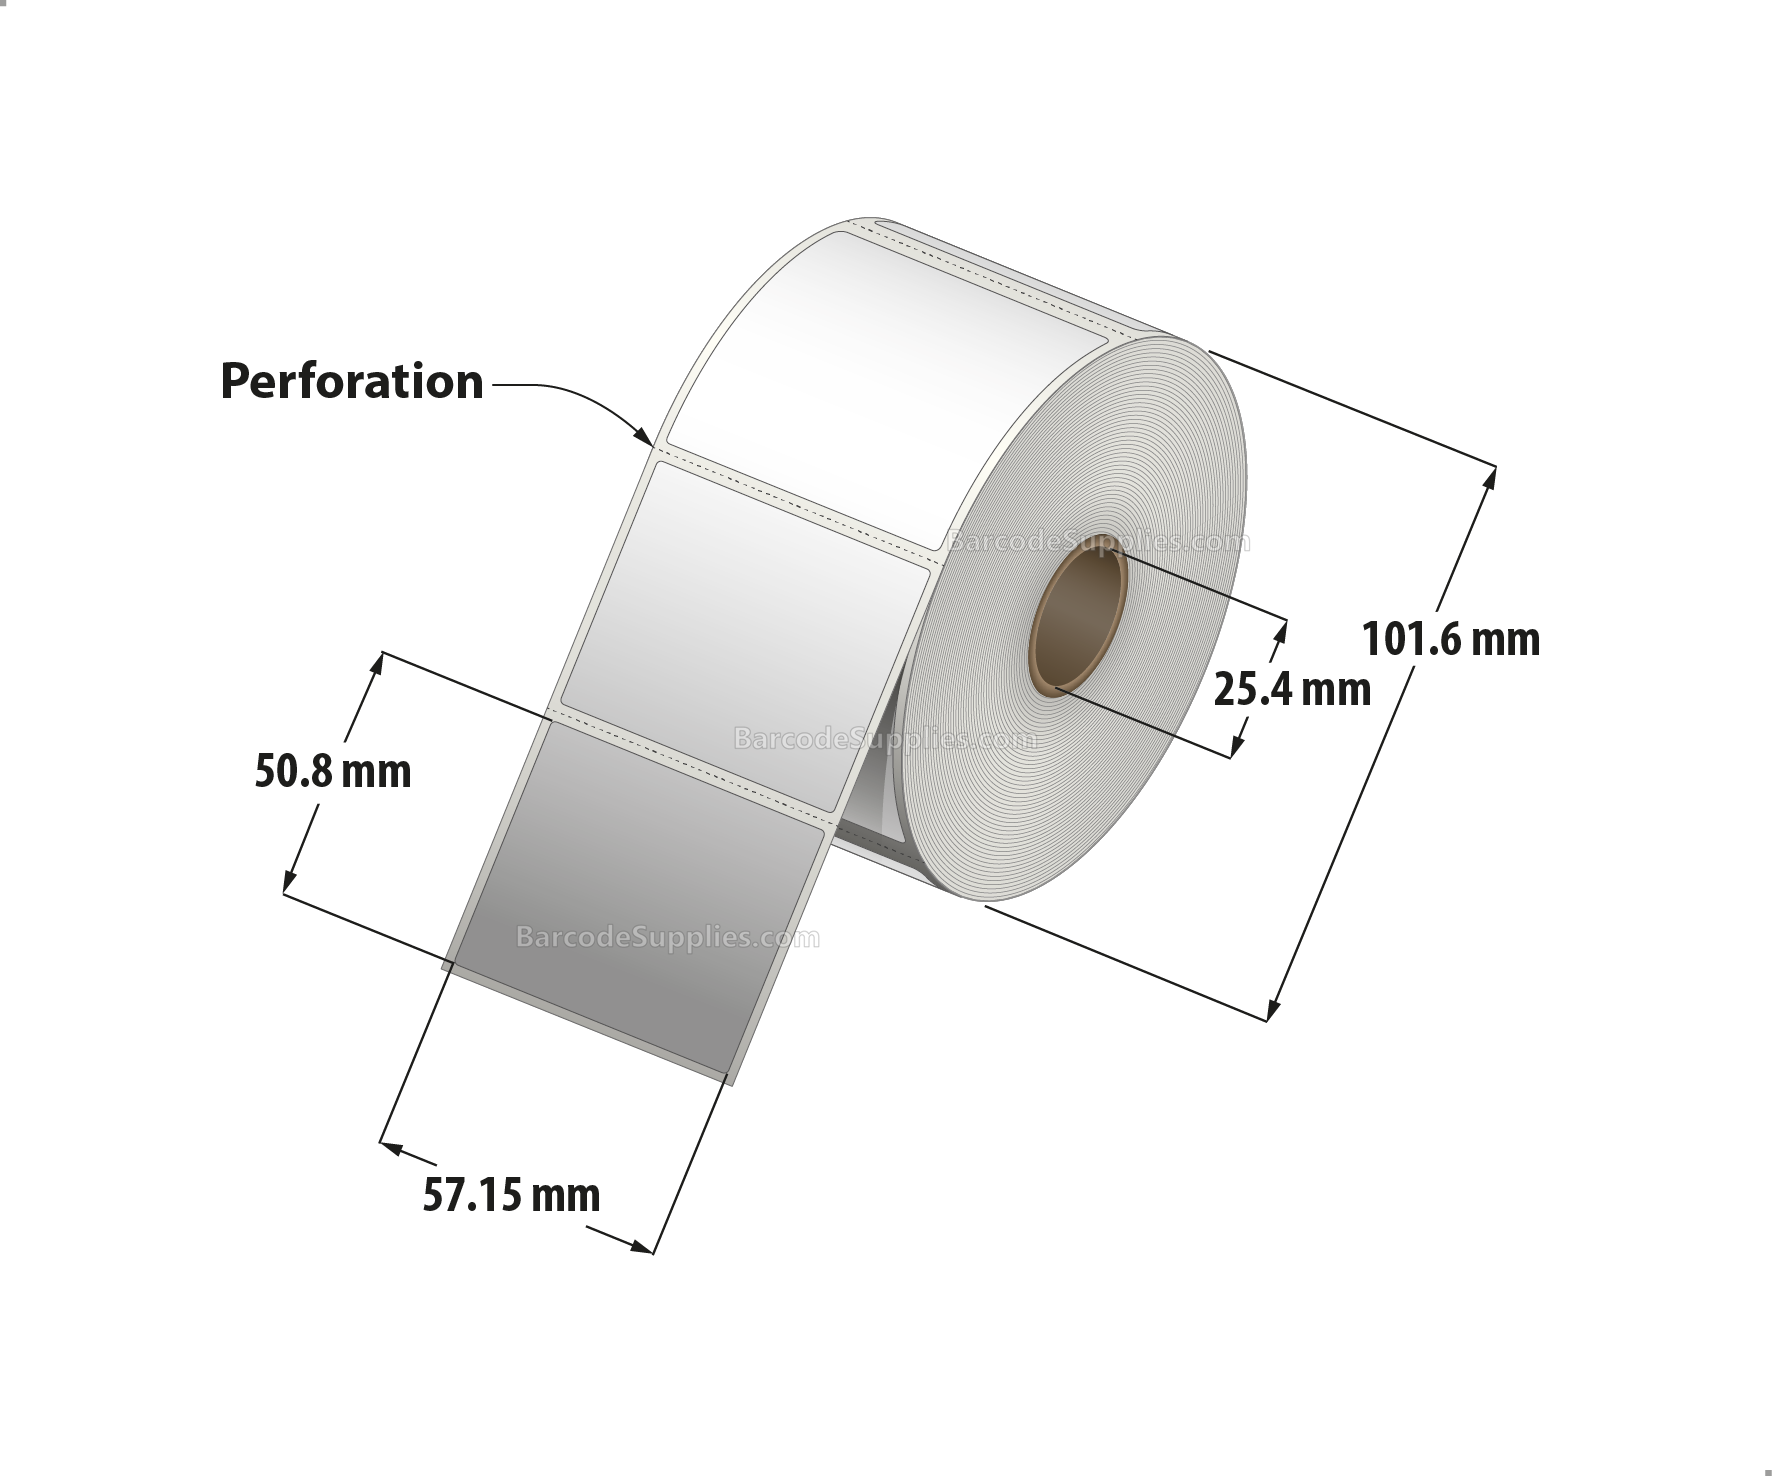 2.25 x 2 Thermal Transfer White Labels With Rubber Adhesive - Perforated - 735 Labels Per Roll - Carton Of 12 Rolls - 8820 Labels Total - MPN: RTT4-225200-1P